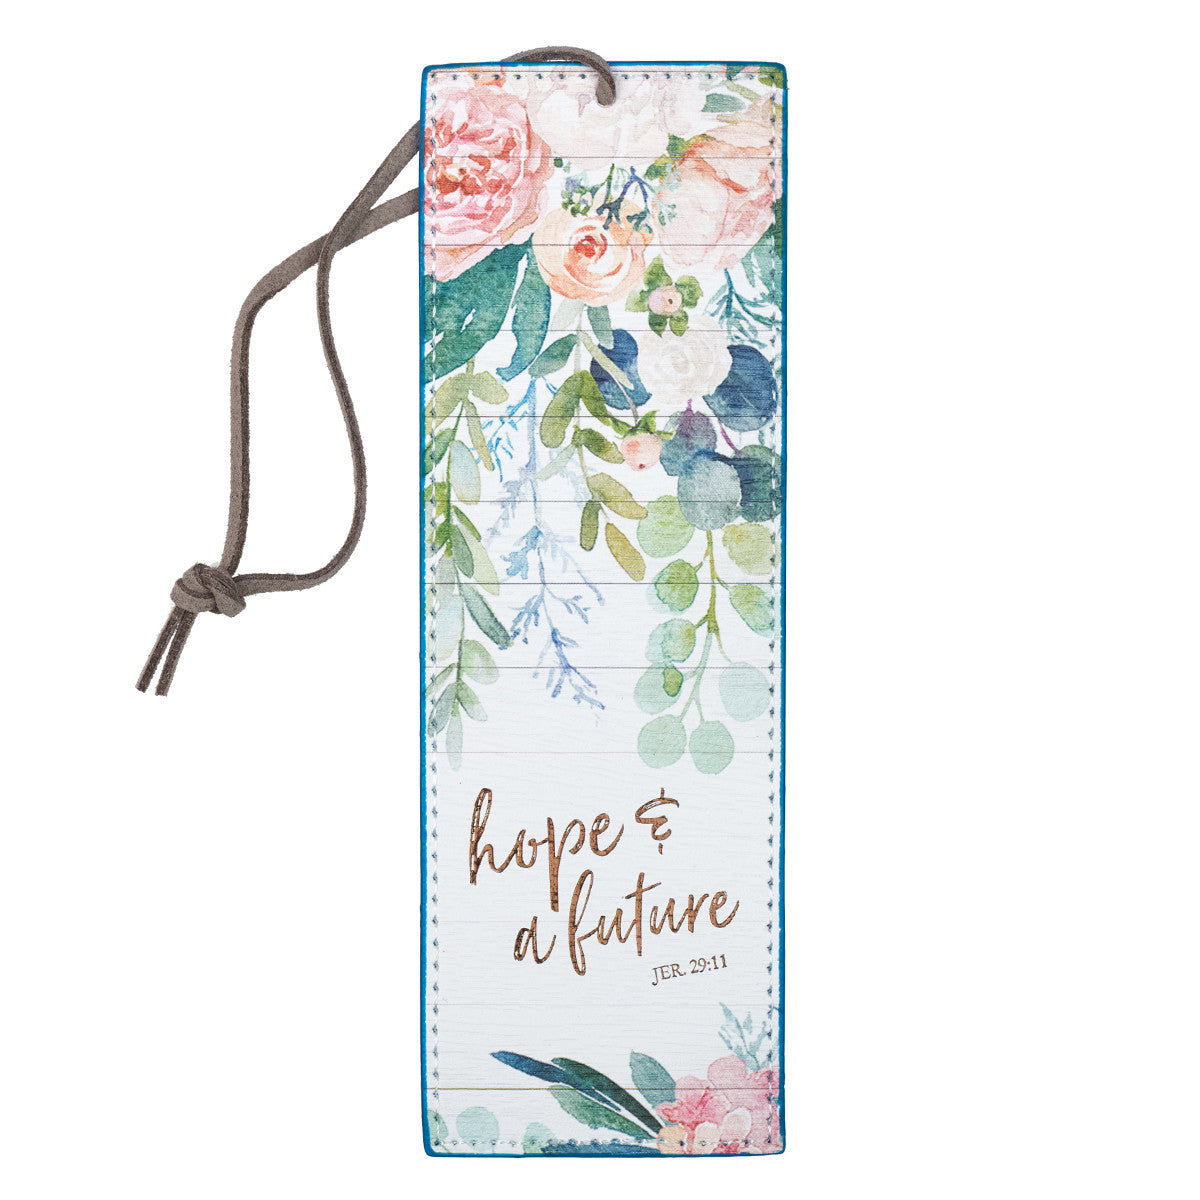 Hope and Future LuxLeather Pagemarker - Jeremiah 29:11